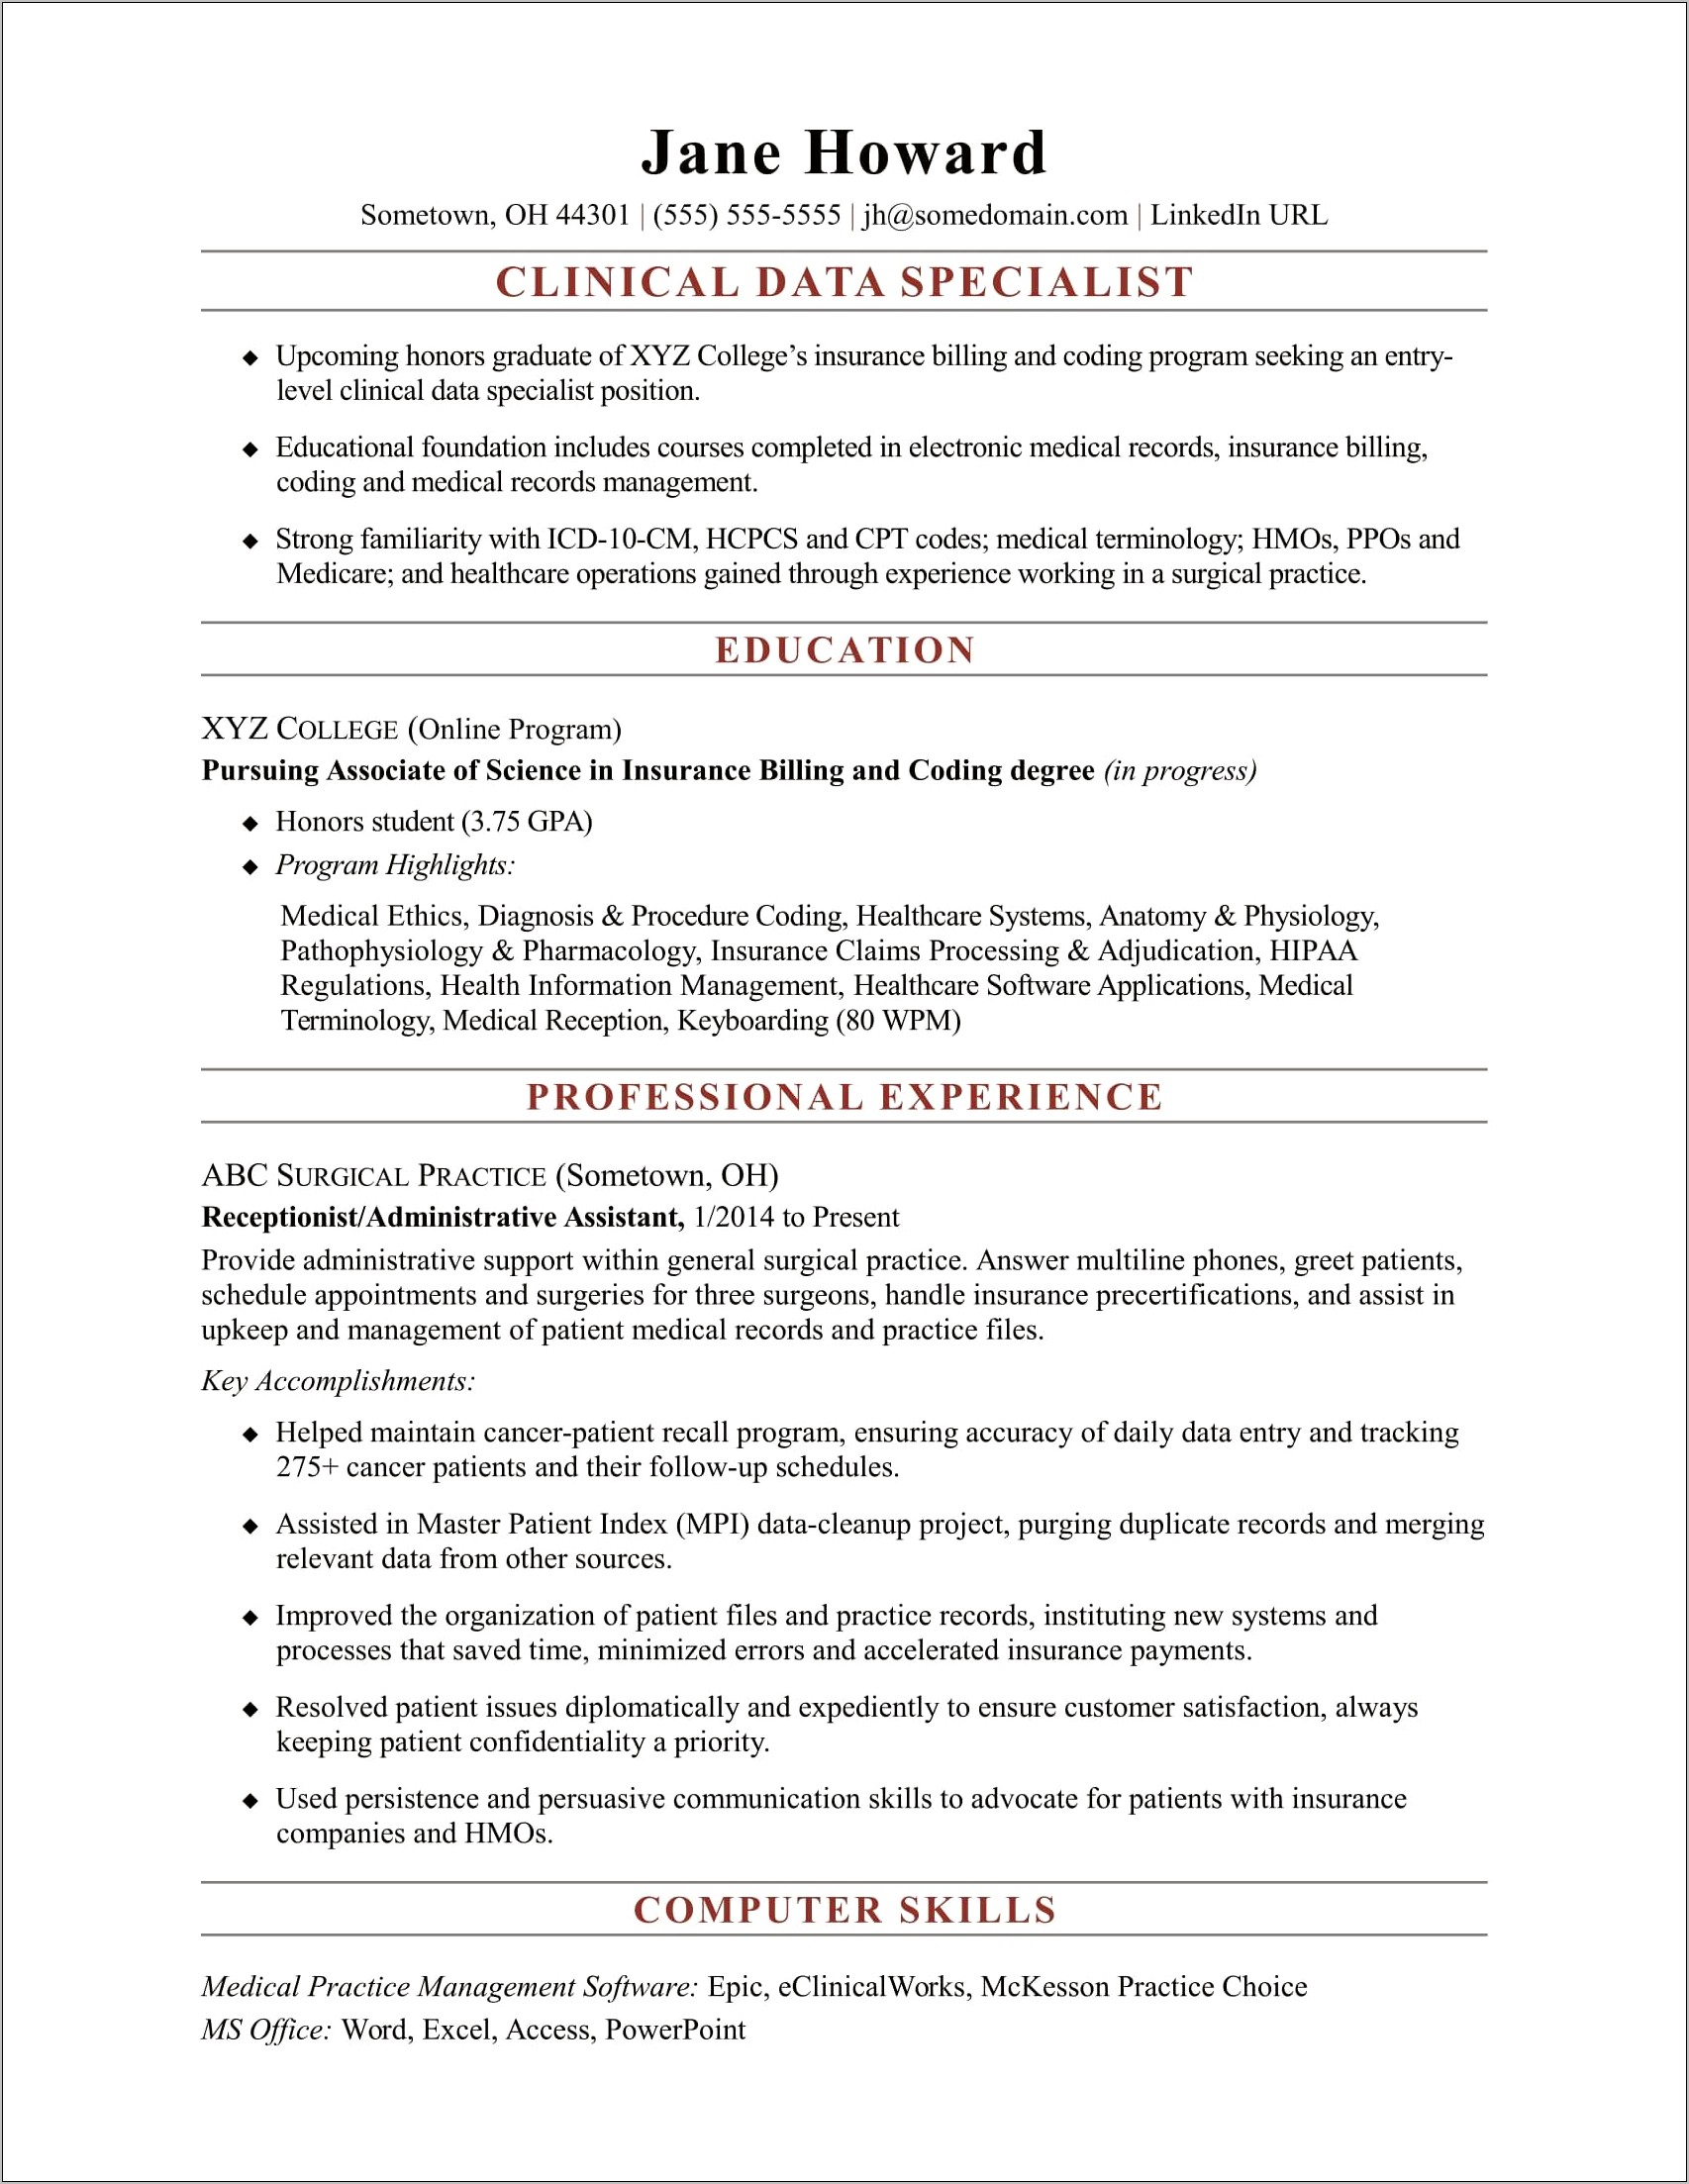 Resume Terms For Computer Skills